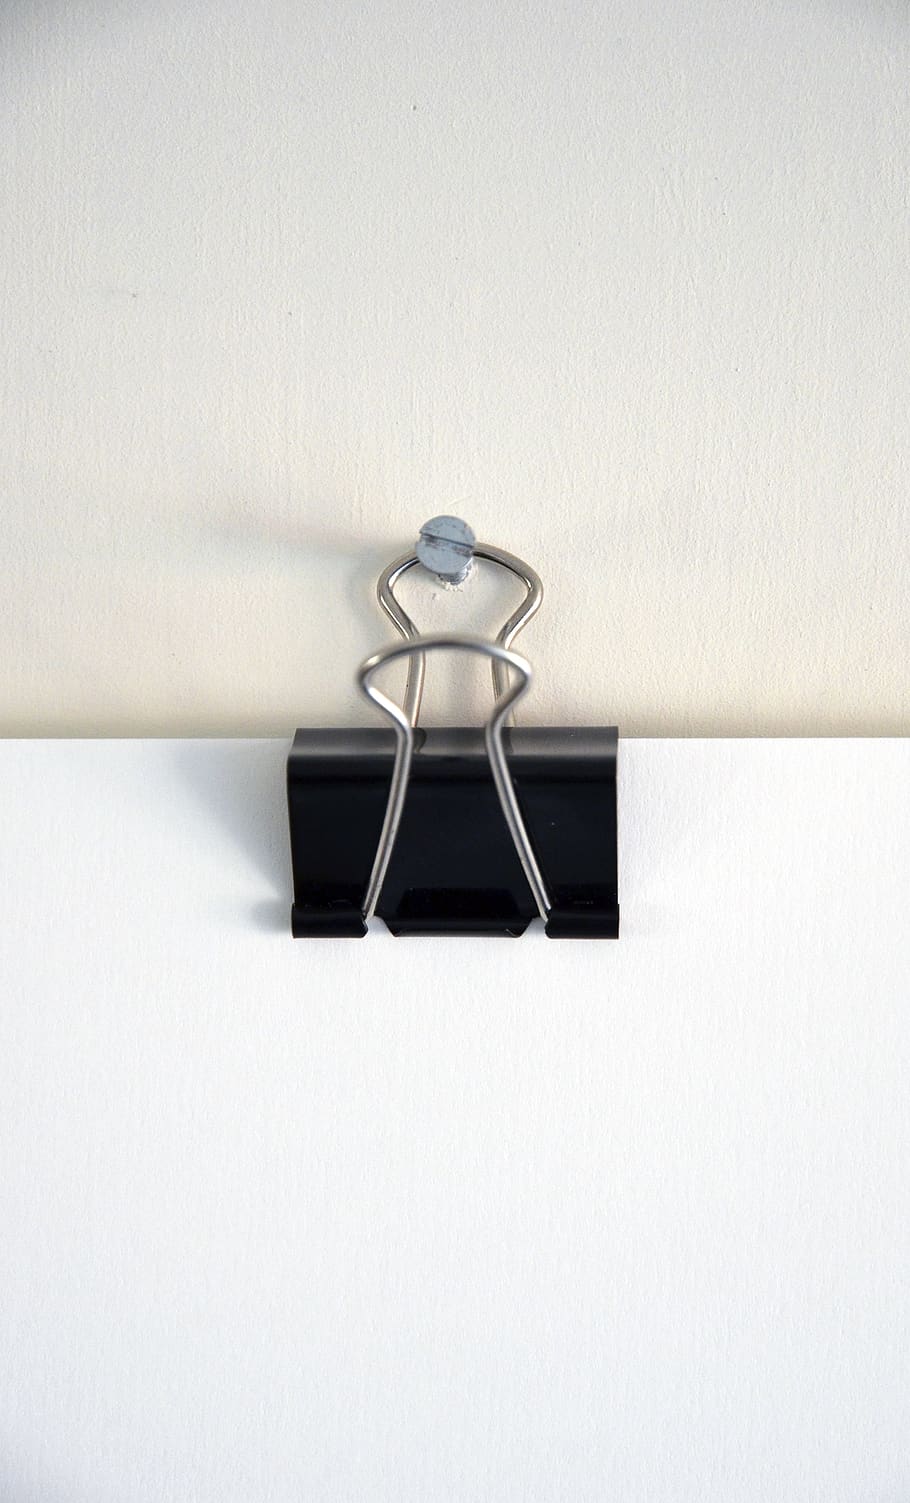 clip, clipping, white, paper, paperclip, design, empty, blank paper, wall, binder clip